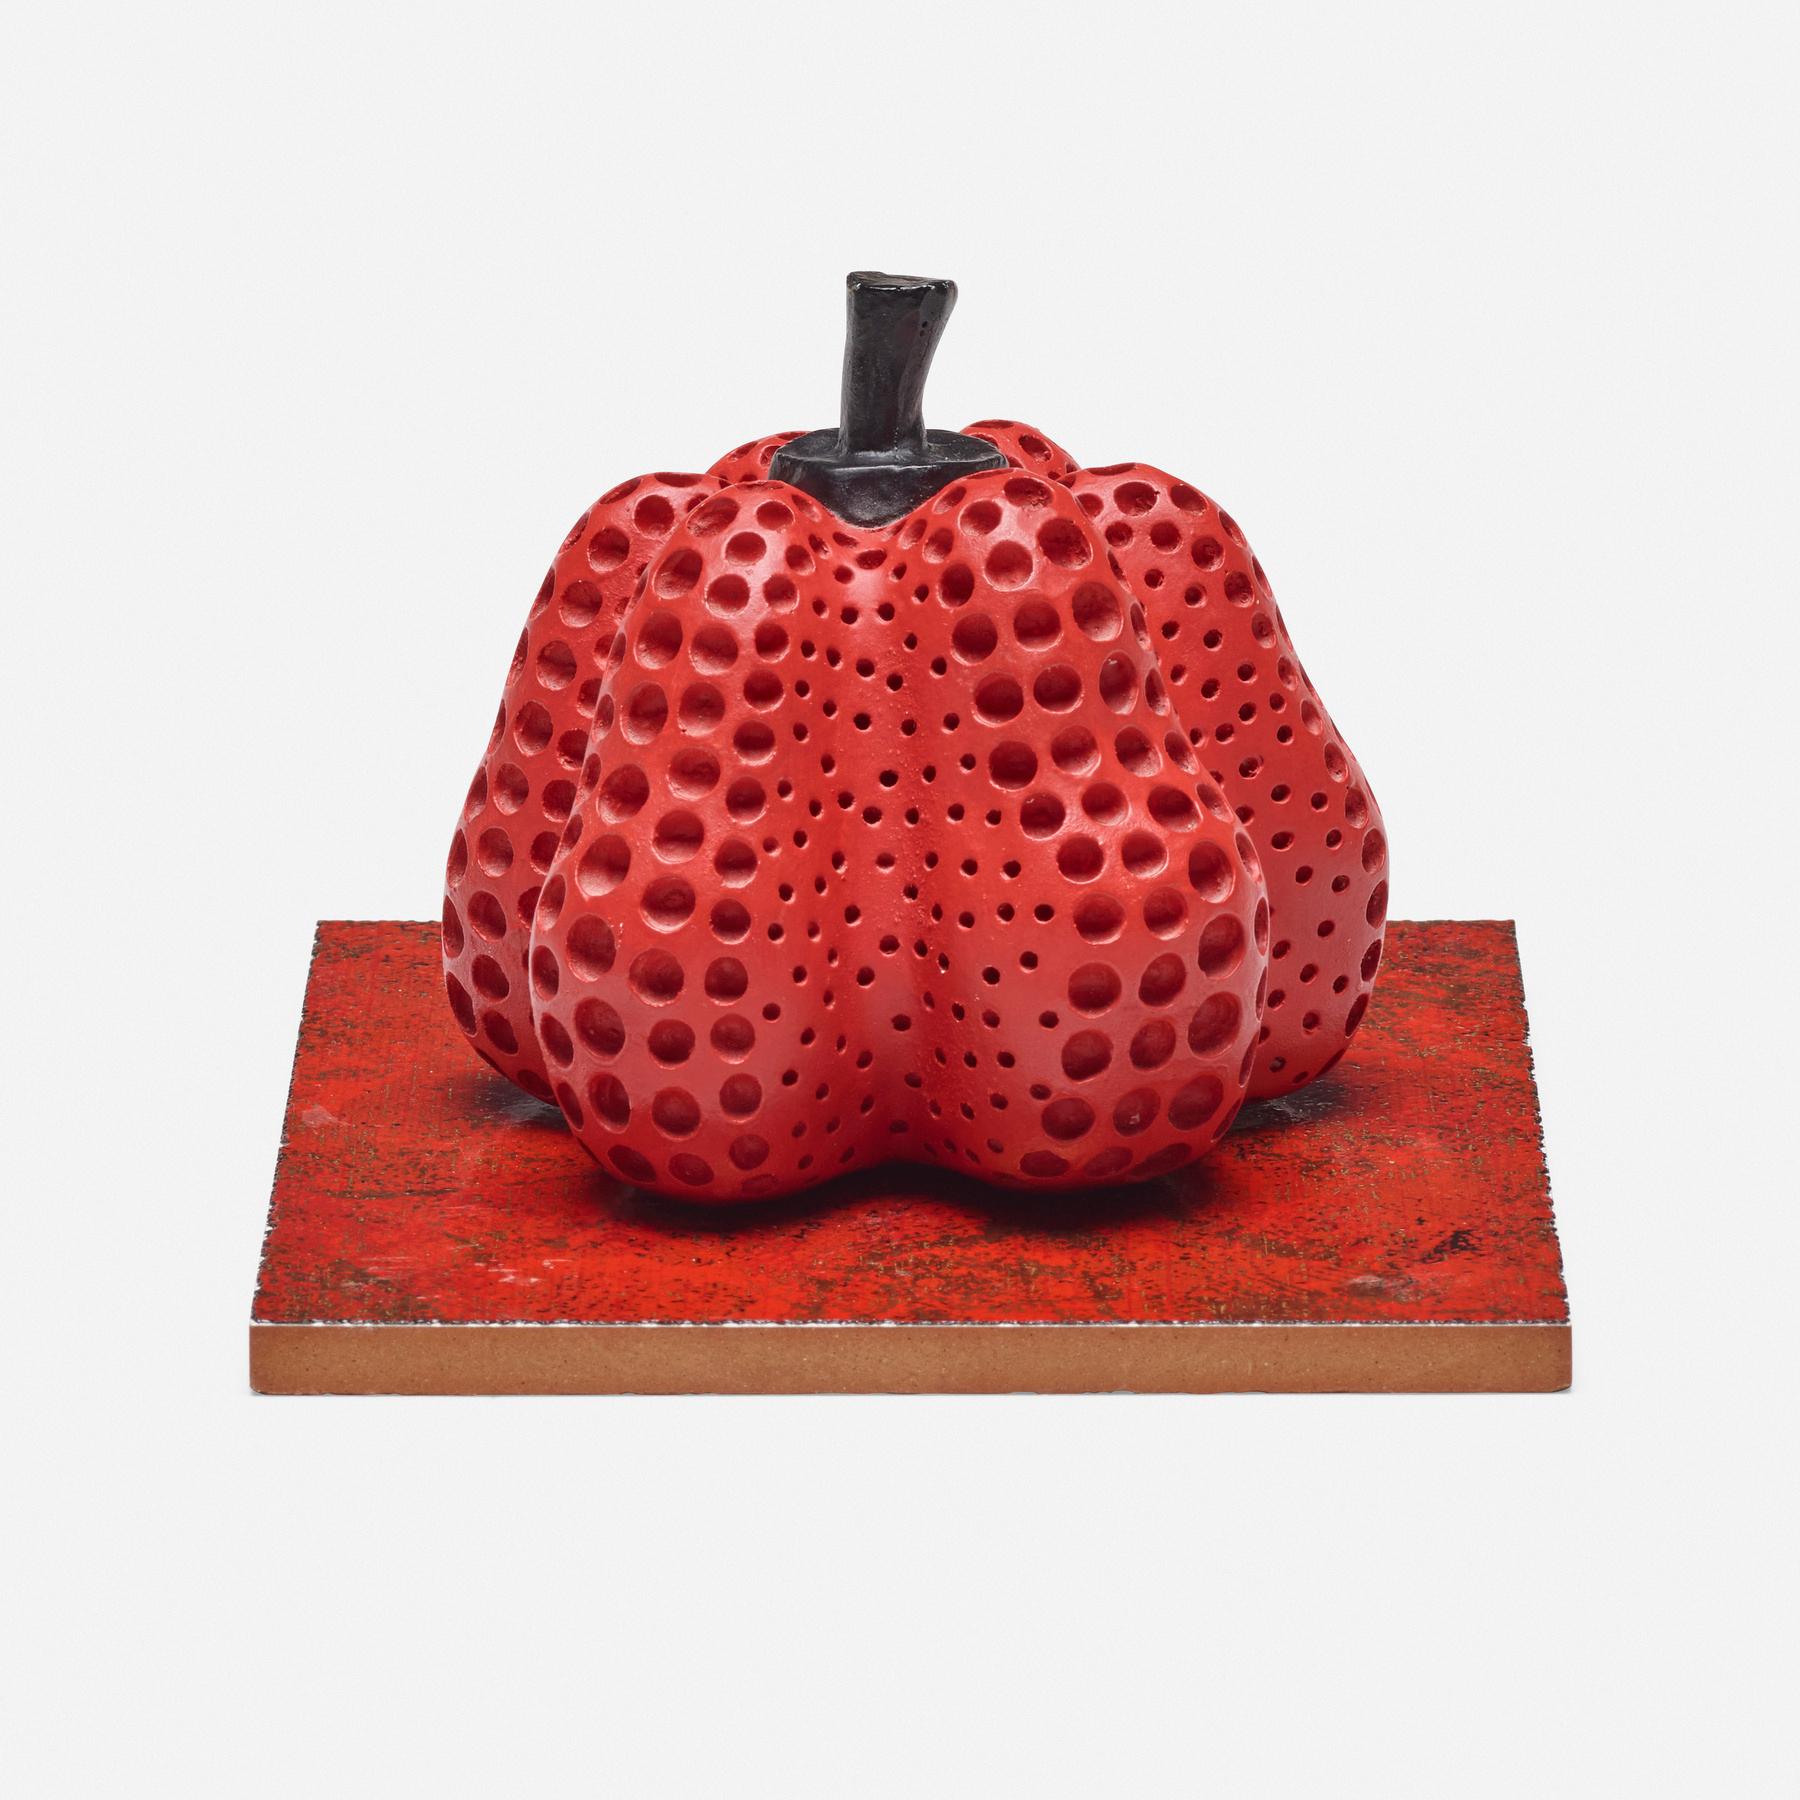 Original Limited Edition 7/30 hand signed and numbered Pumpkin (Red) Sculpture - Mixed Media Art by Yayoi Kusama